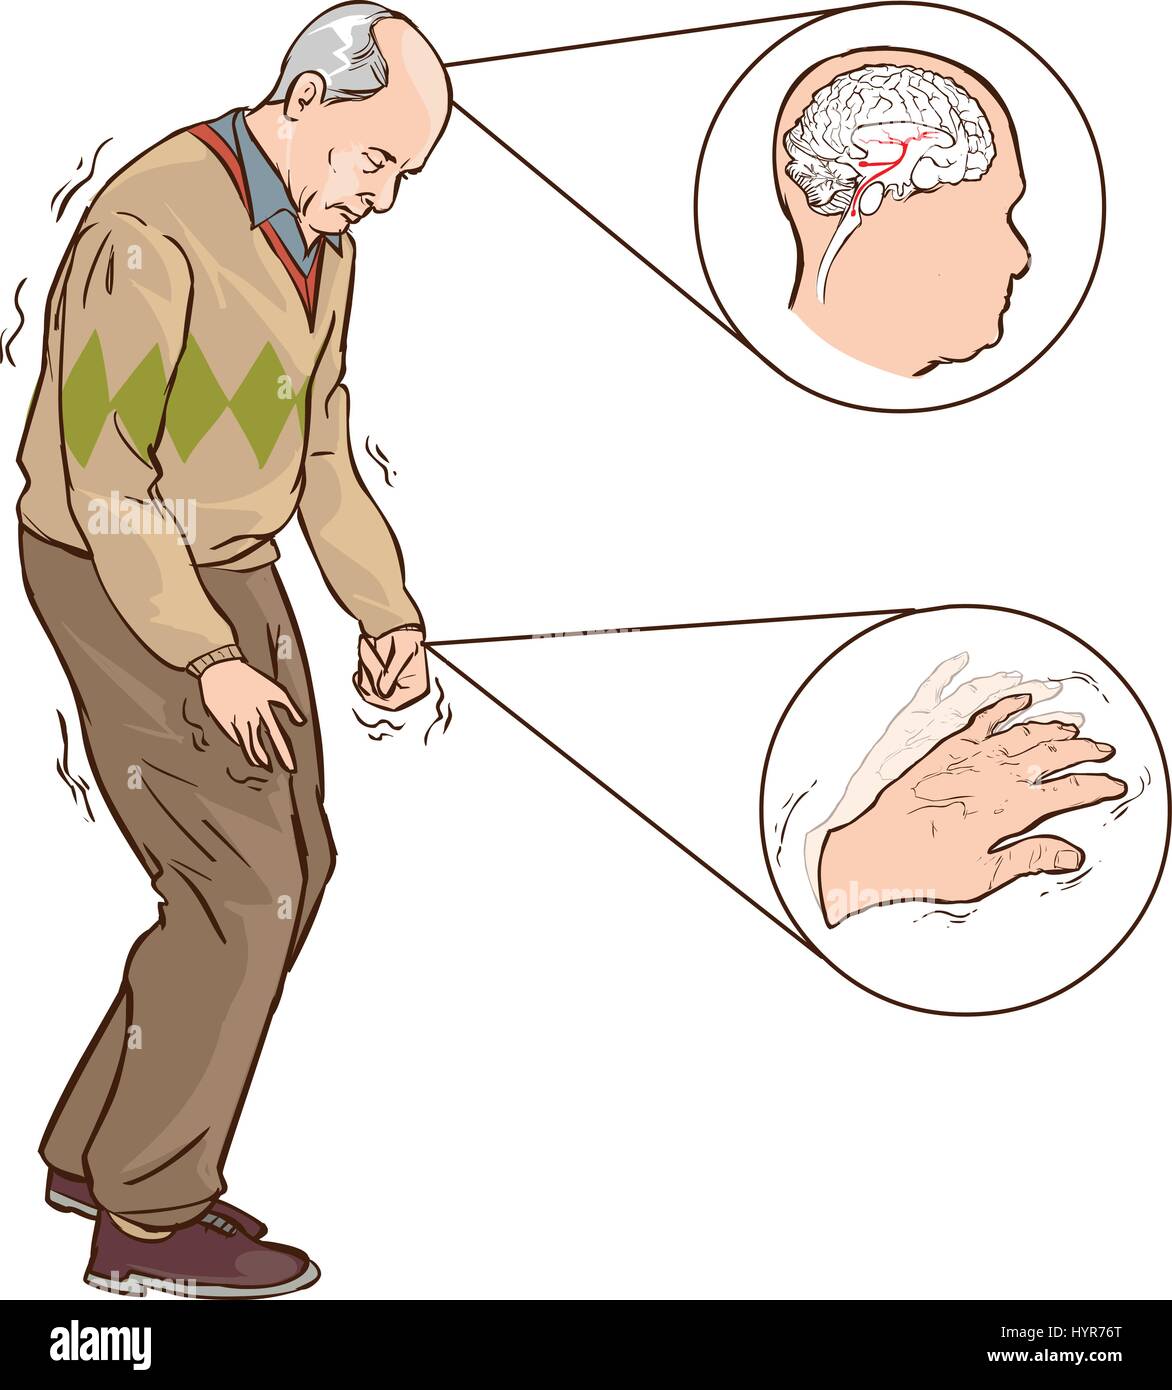 vector illustration of aOld man with Parkinson symptoms difficult Stock ...